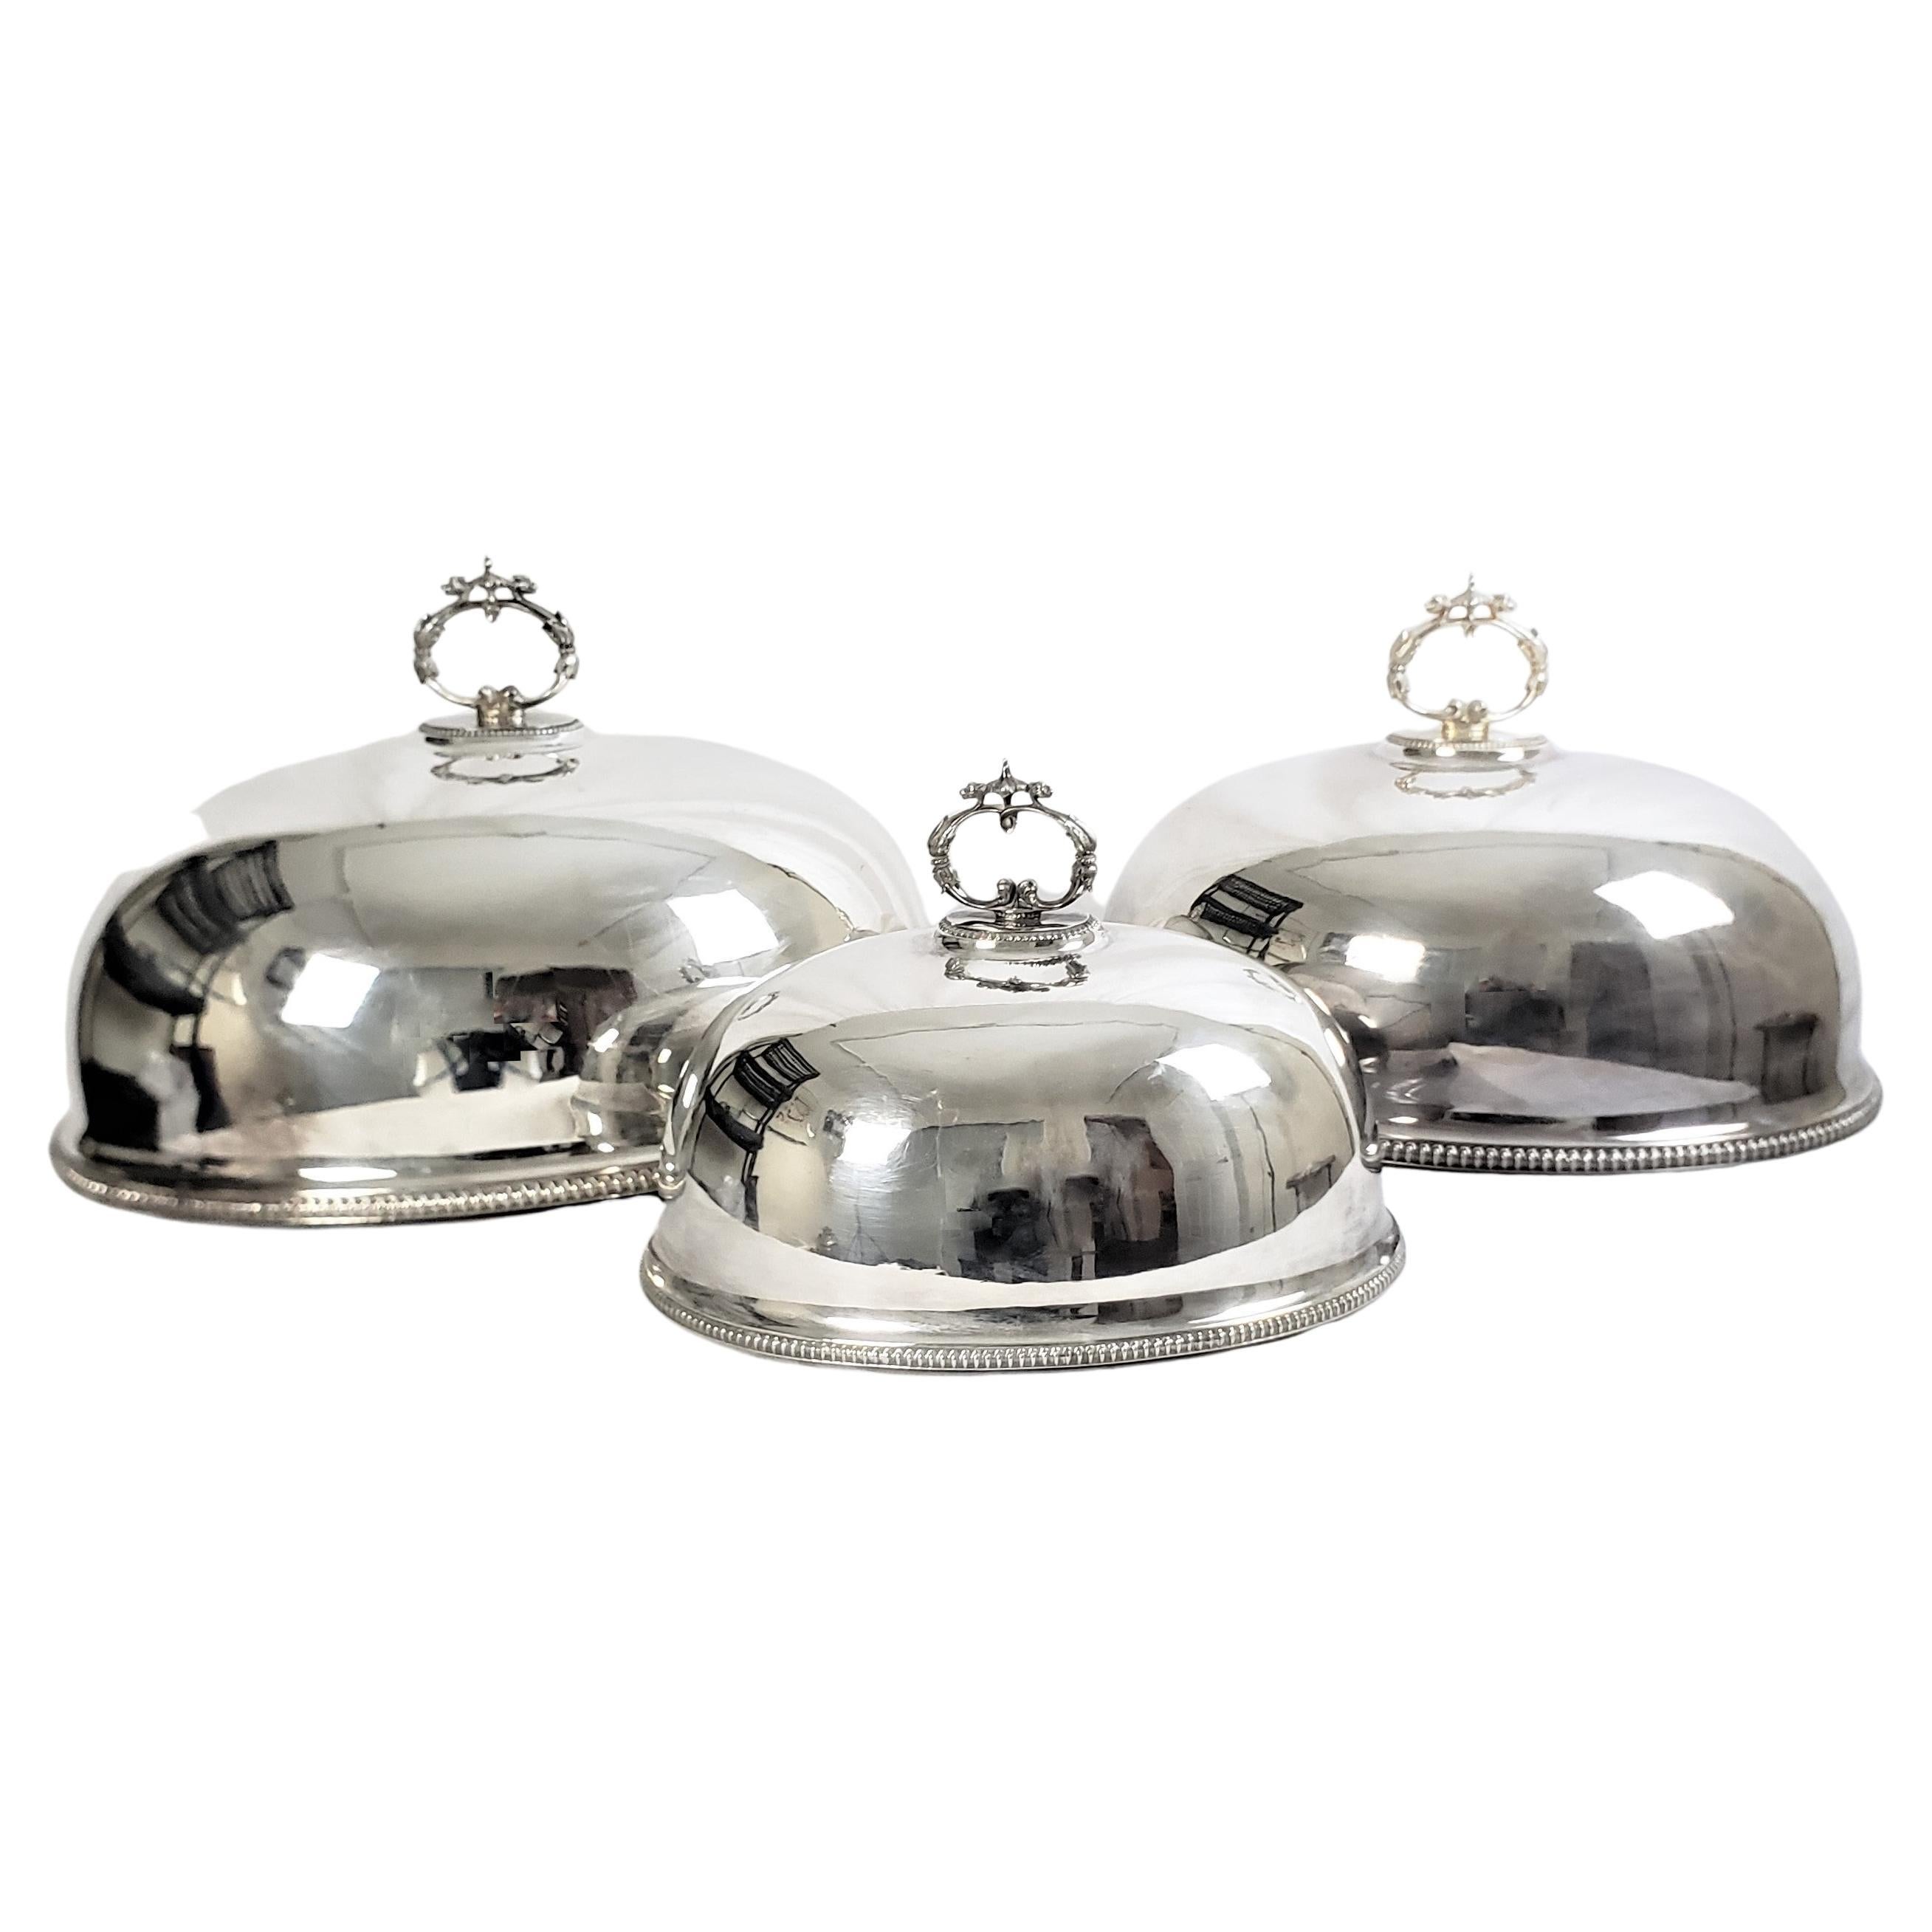 Antique Hand-Crafted & Silver Plated Graduated Meat Dome or Entre Cover Set